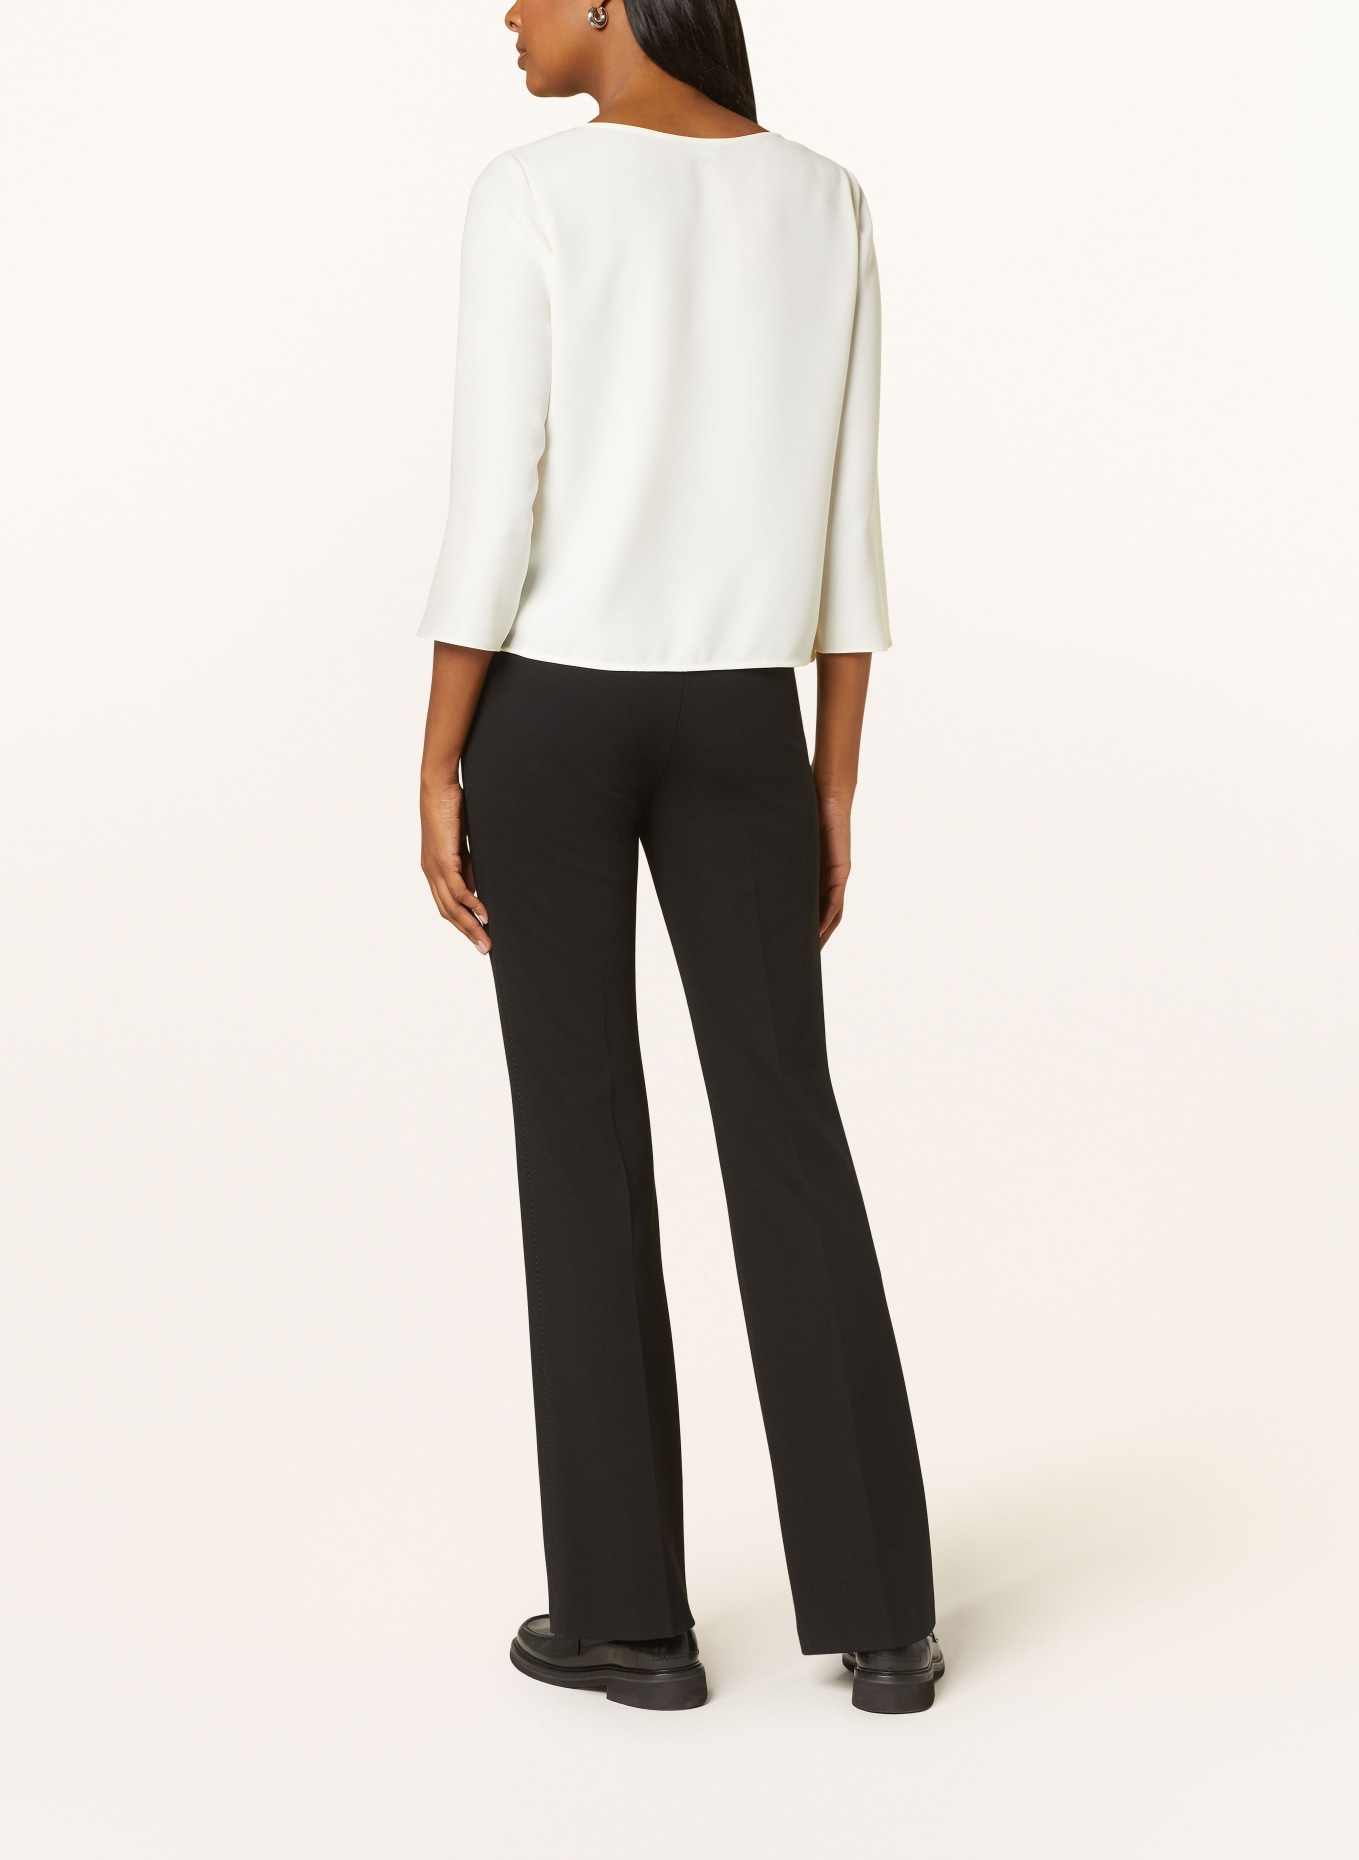 EMPORIO ARMANI Shirt blouse with 3/4 sleeves, Color: ECRU (Image 3)